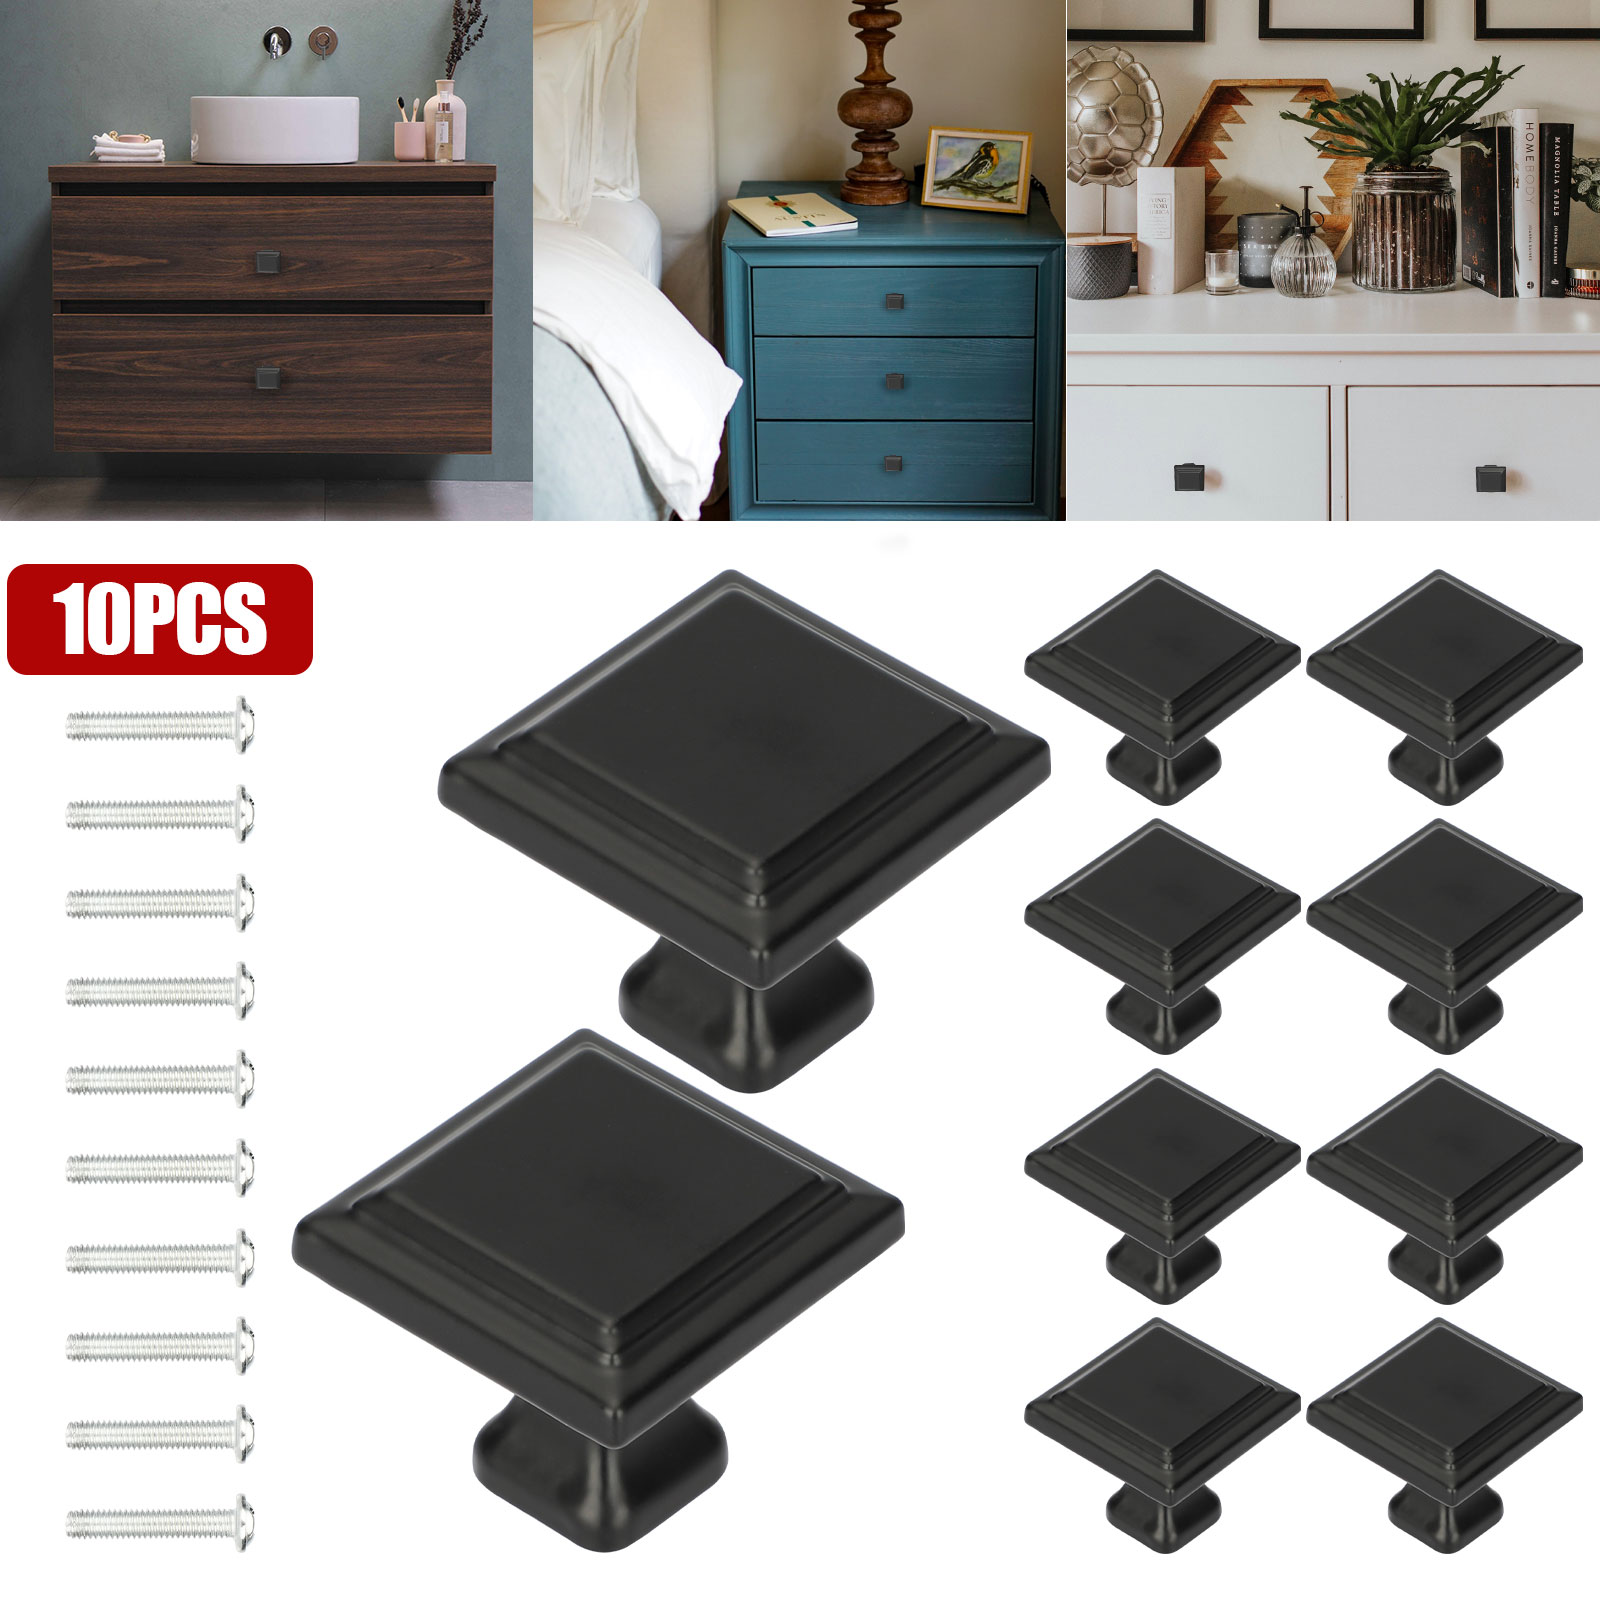 10 Pcs Square Cabinet Knob, TSV Black Pull Handle Drawer Knobs (1.2''), with Fitting Screws, Easy to Install, for Kitchen Cupboard Door, Bedroom Dresser Drawer, Bathroom Wardrobe Hardware - image 1 of 9